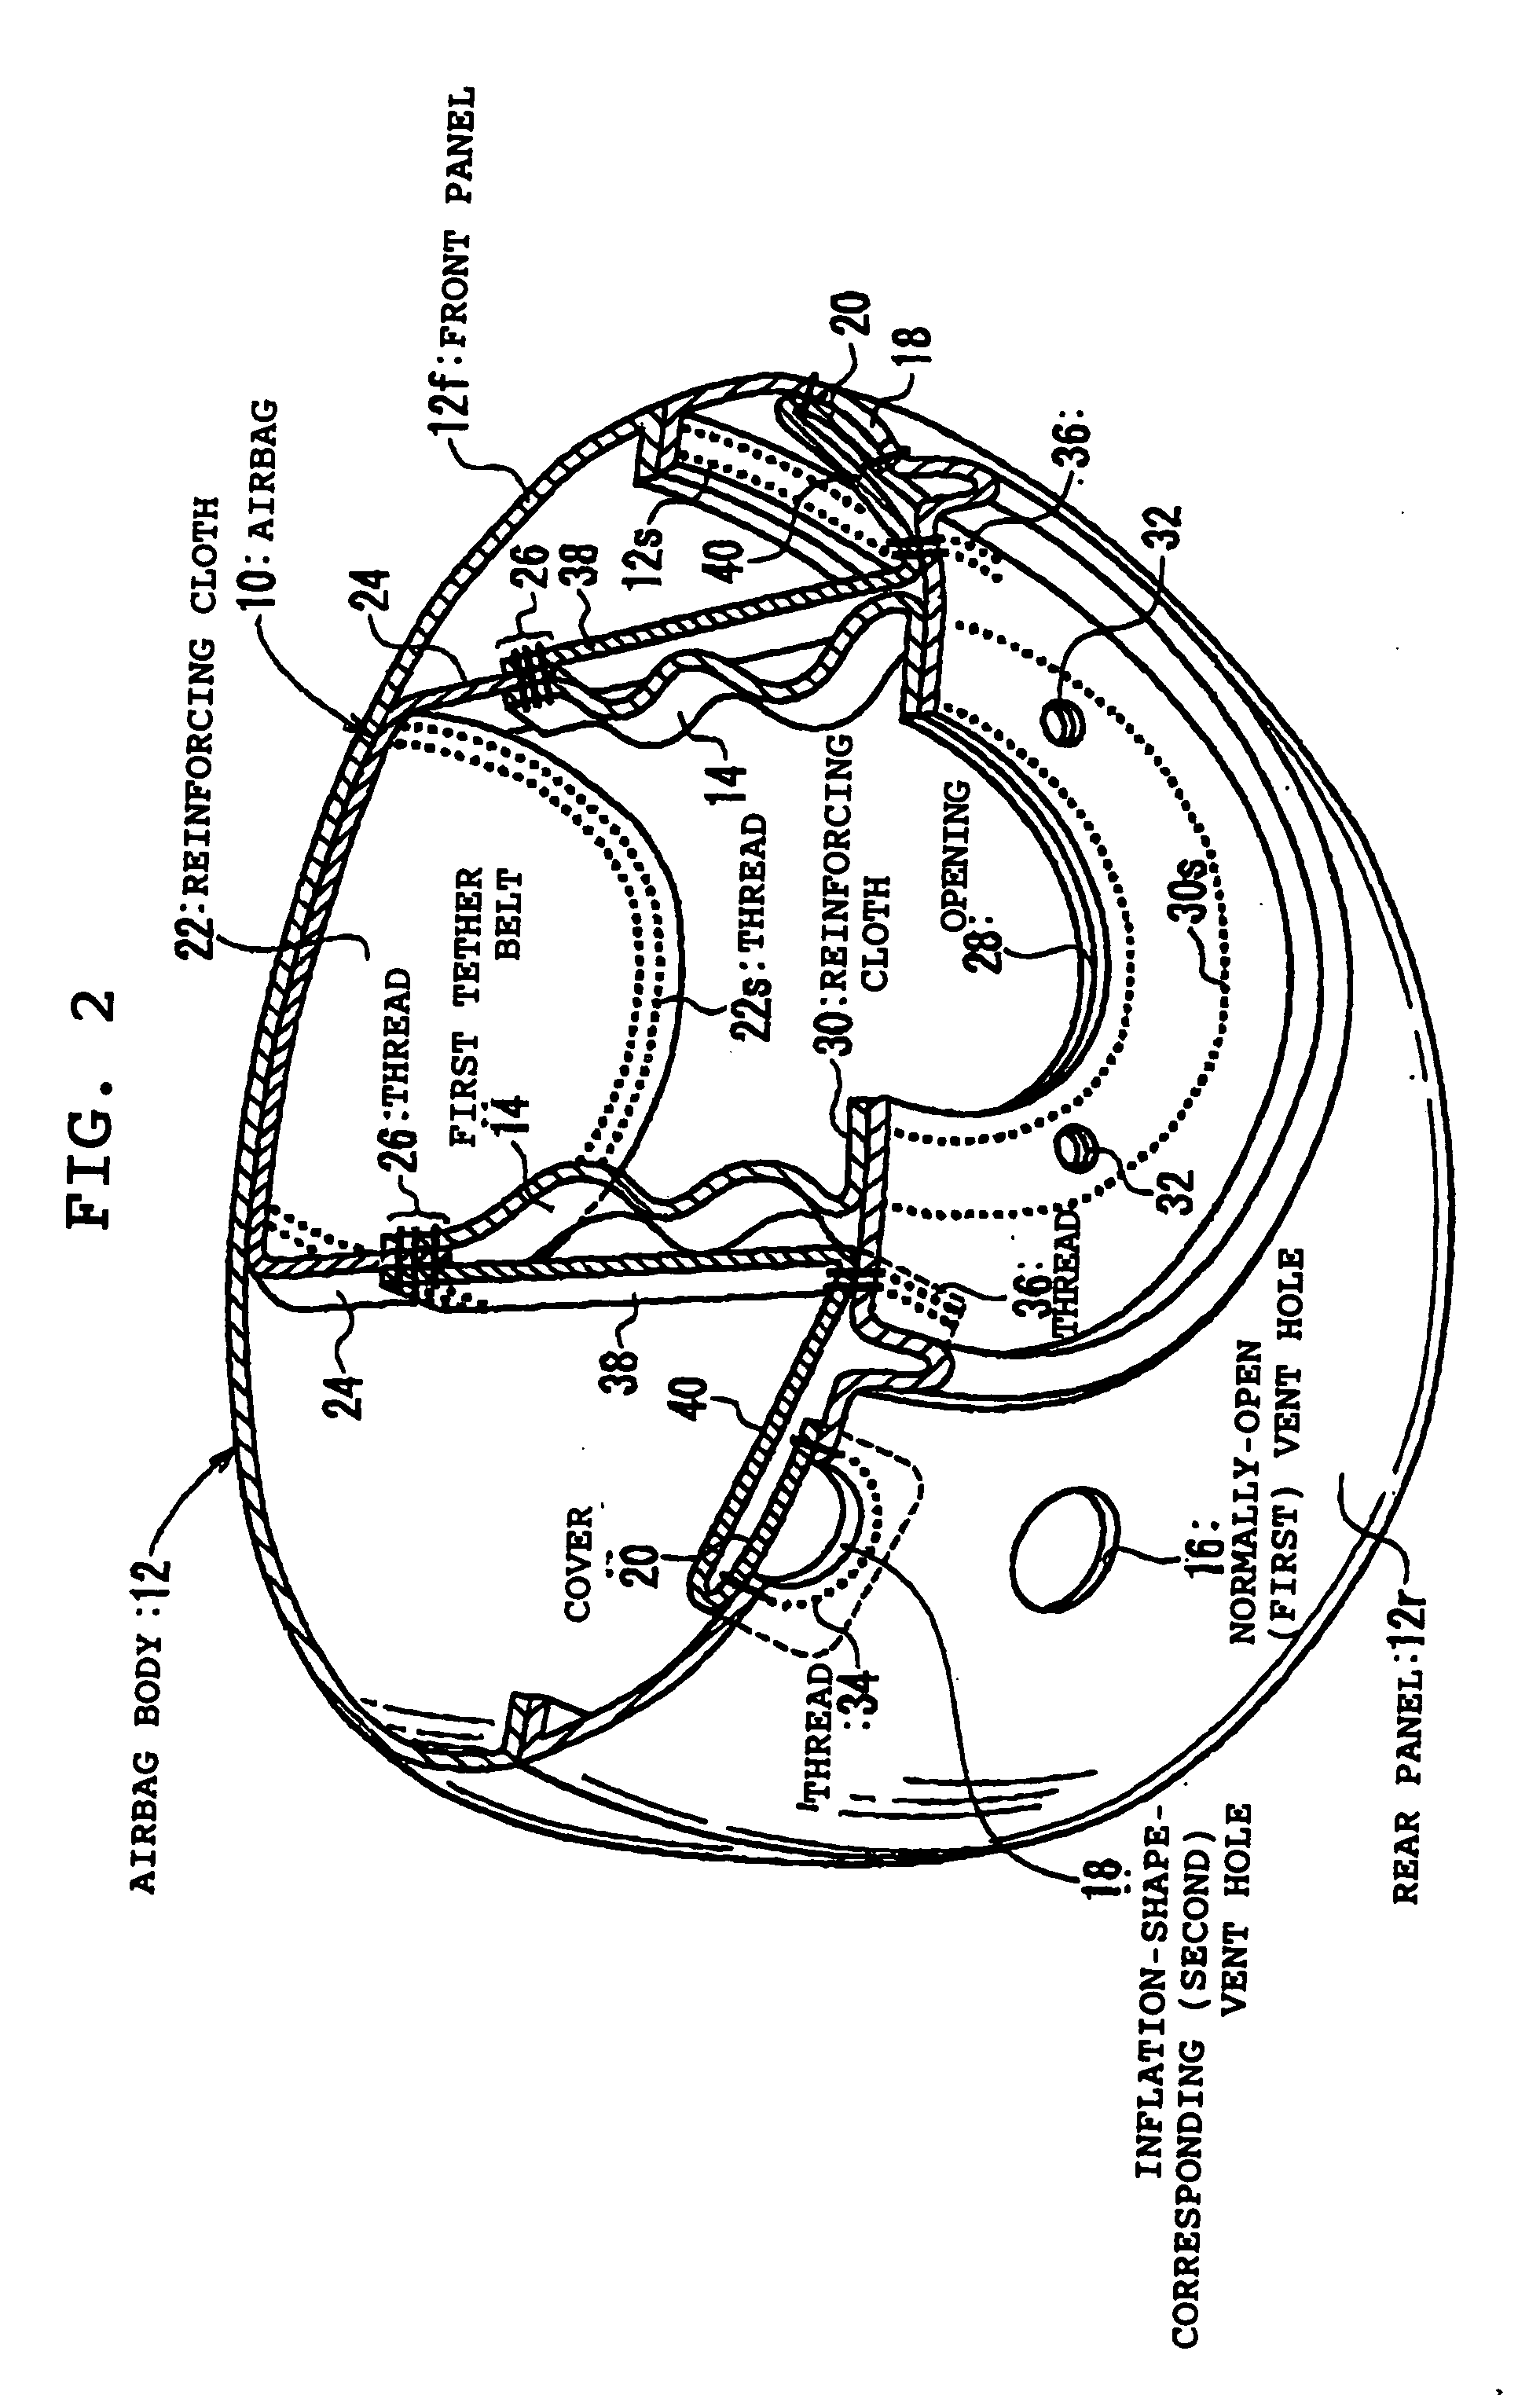 Airbag and airbag system